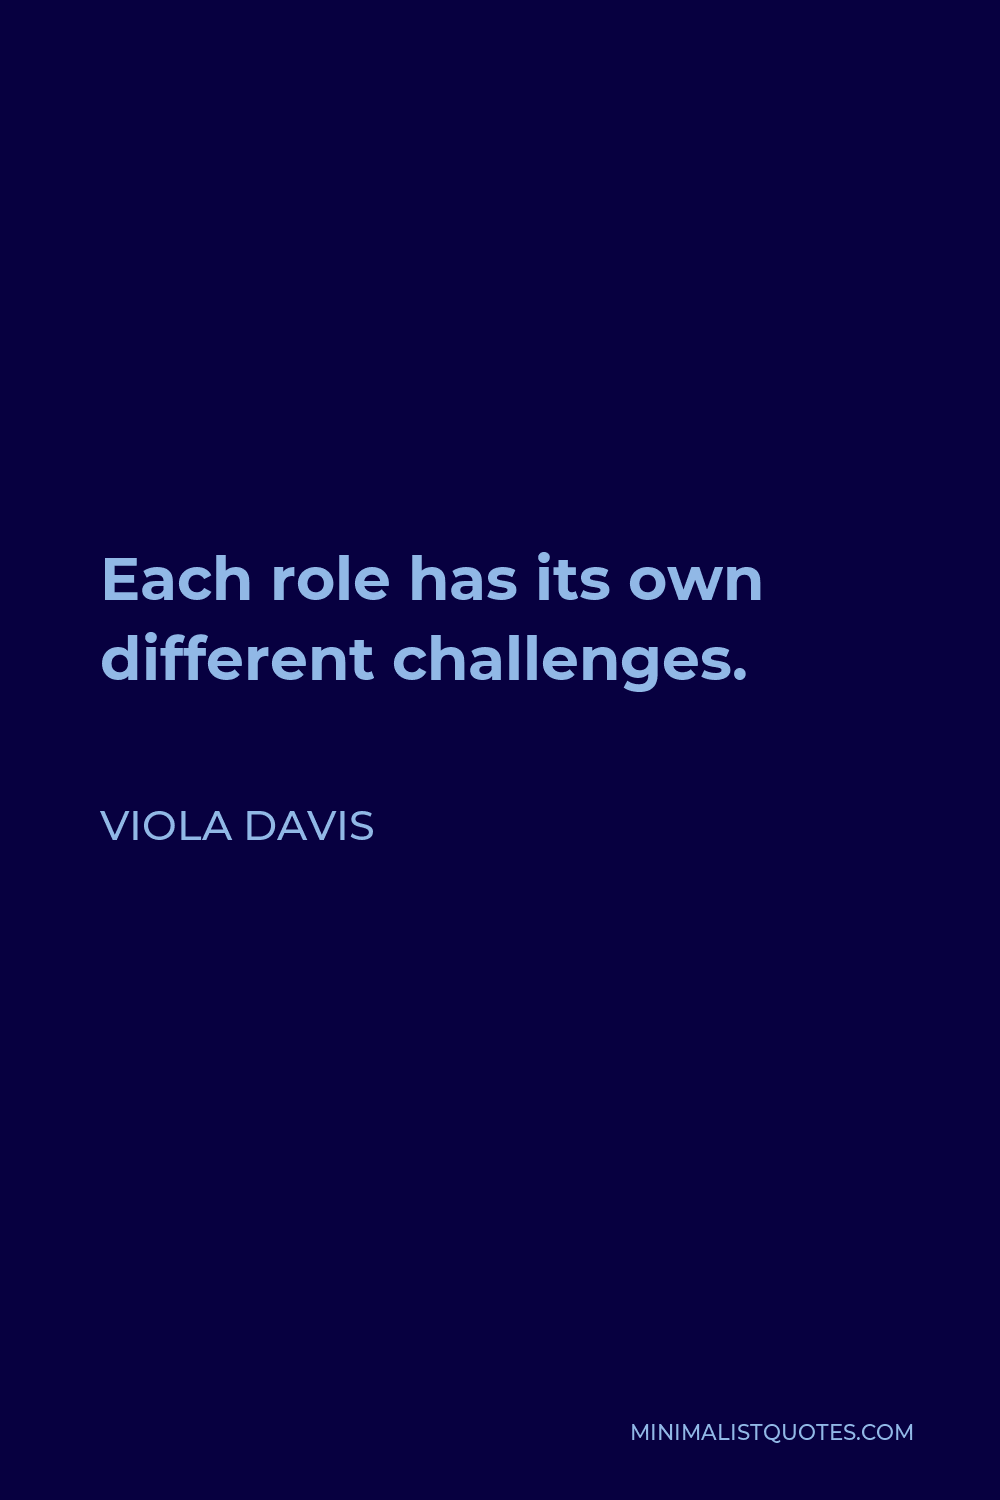 Viola Davis Quote - Each role has its own different challenges.